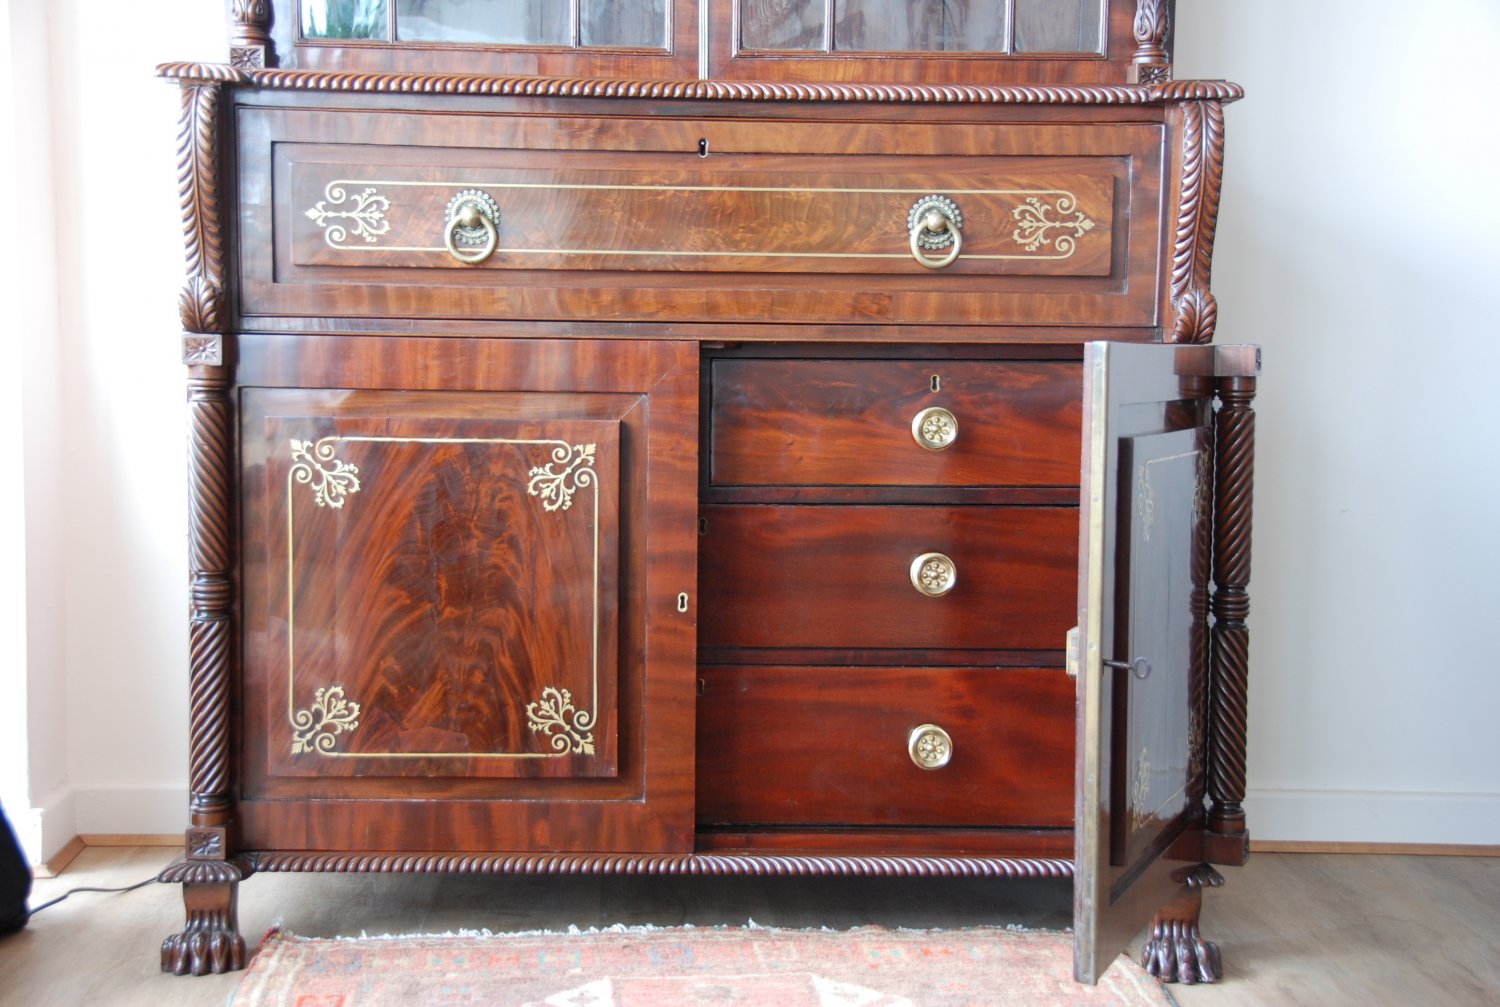 A fine Irish Regency period brass inlaid mahogany secretaire bookcase c1820, most probably from Cork.